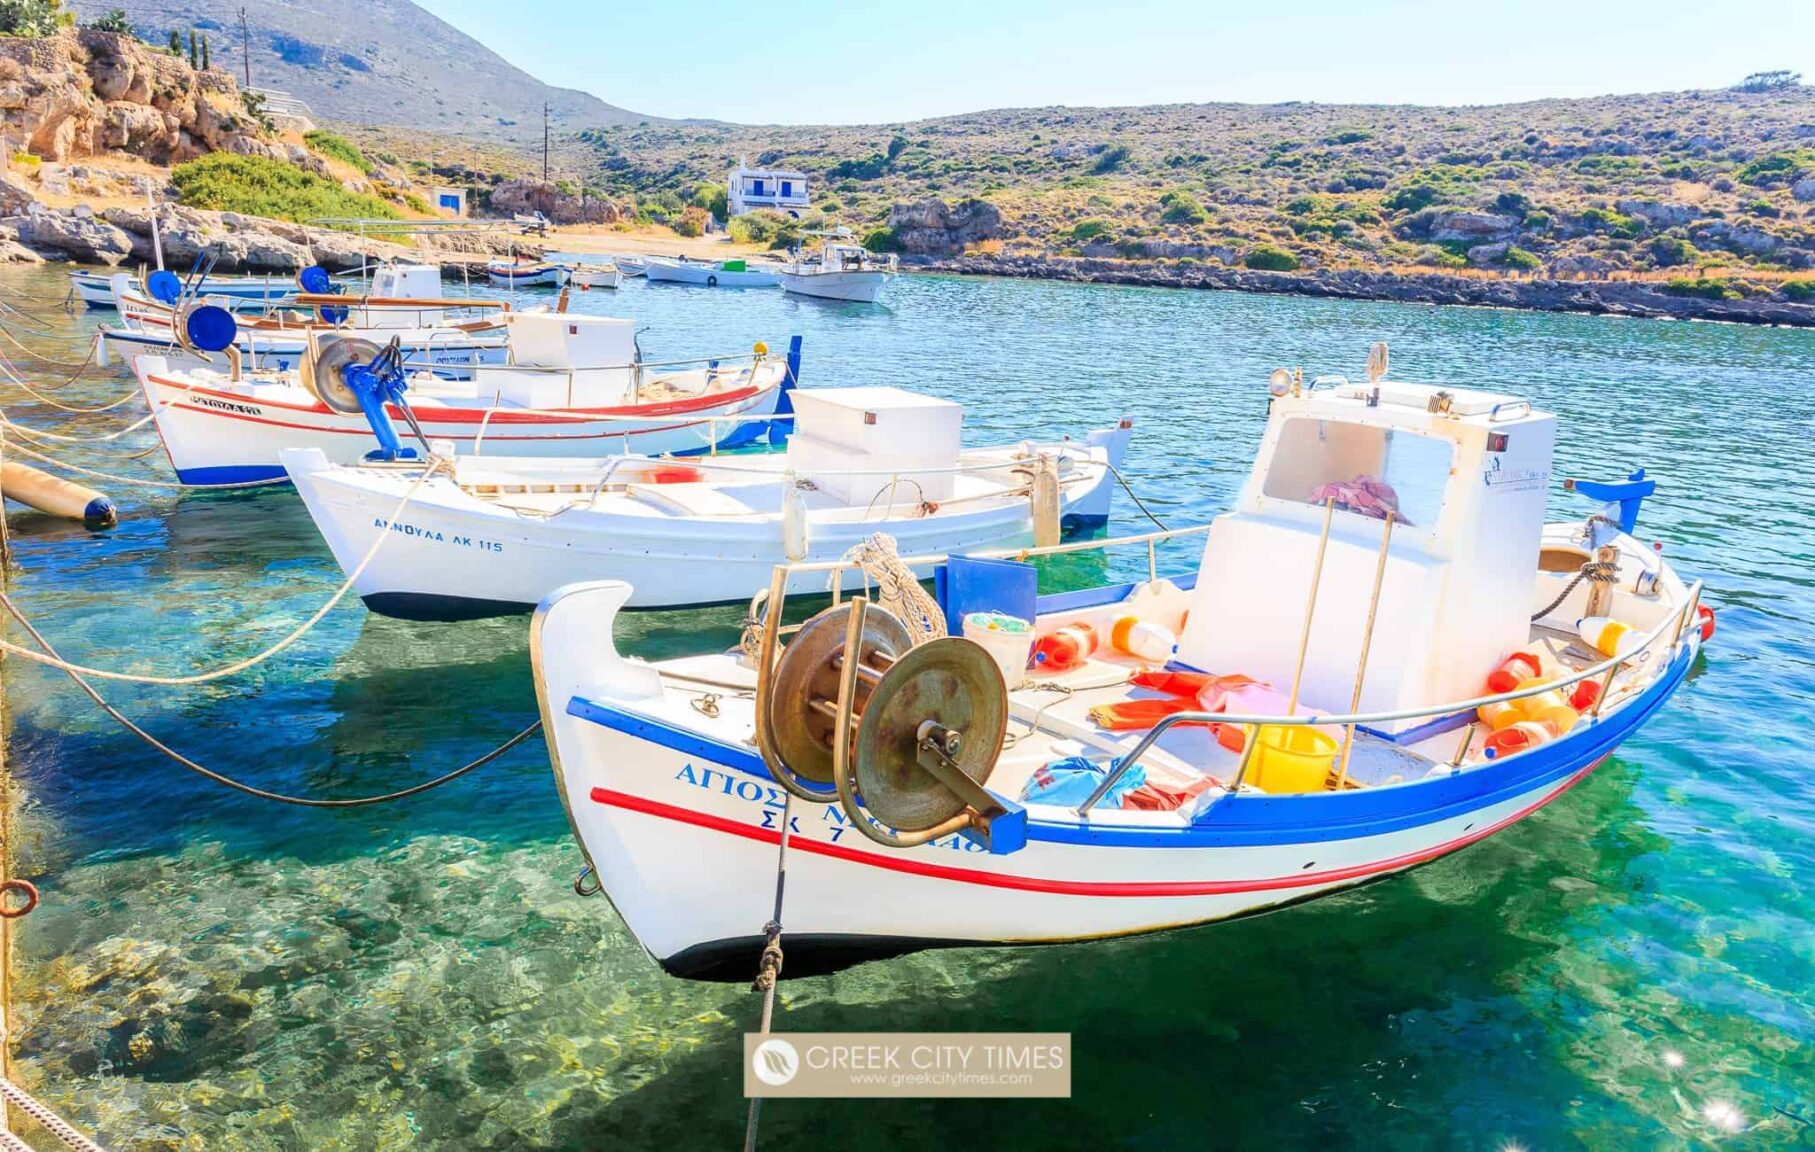 The Guardian picked their 10 'best crowd-free' Greek destinations